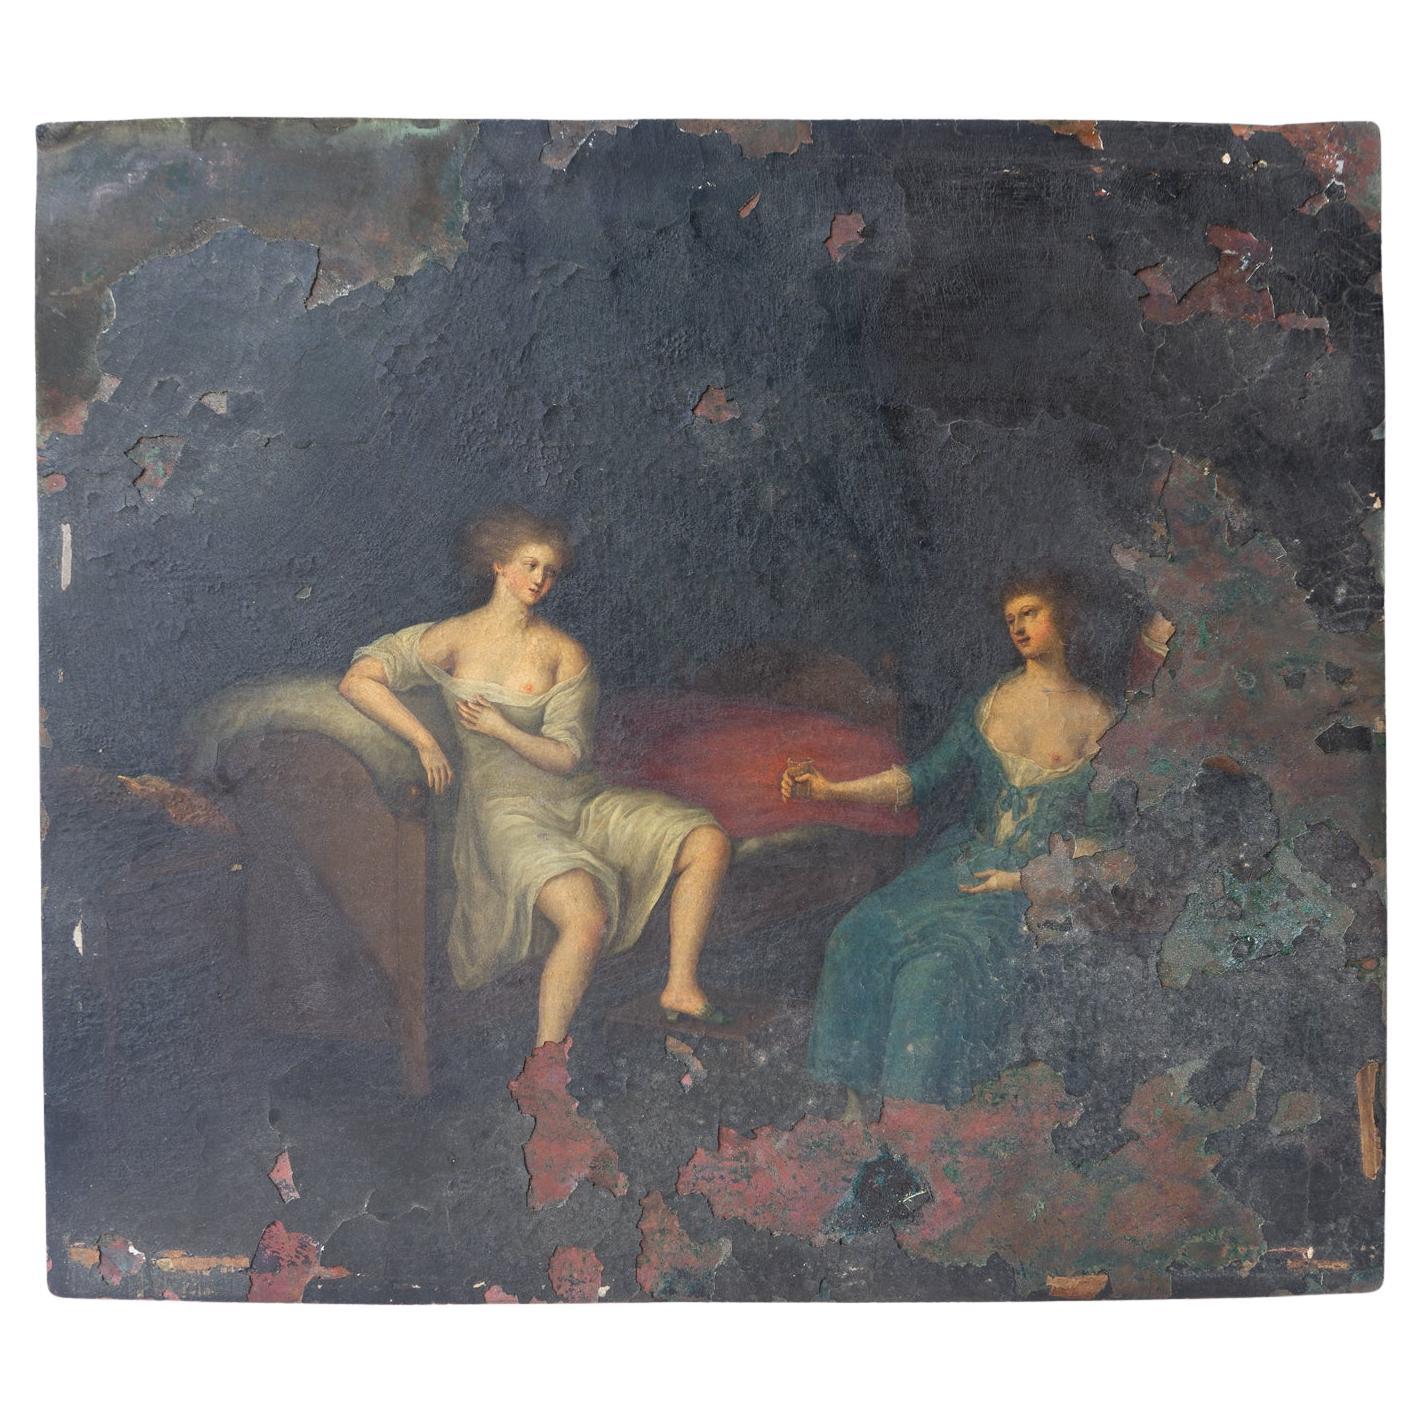 ANTIQUE ORIGINAL OIL ON COPPER PANEL PAINTING

Depicting two scantily clad females with loose robes bearing their breasts. They are relaxing back on some very comfortable-looking soft furnishings drinking and conversing with each other and appear to